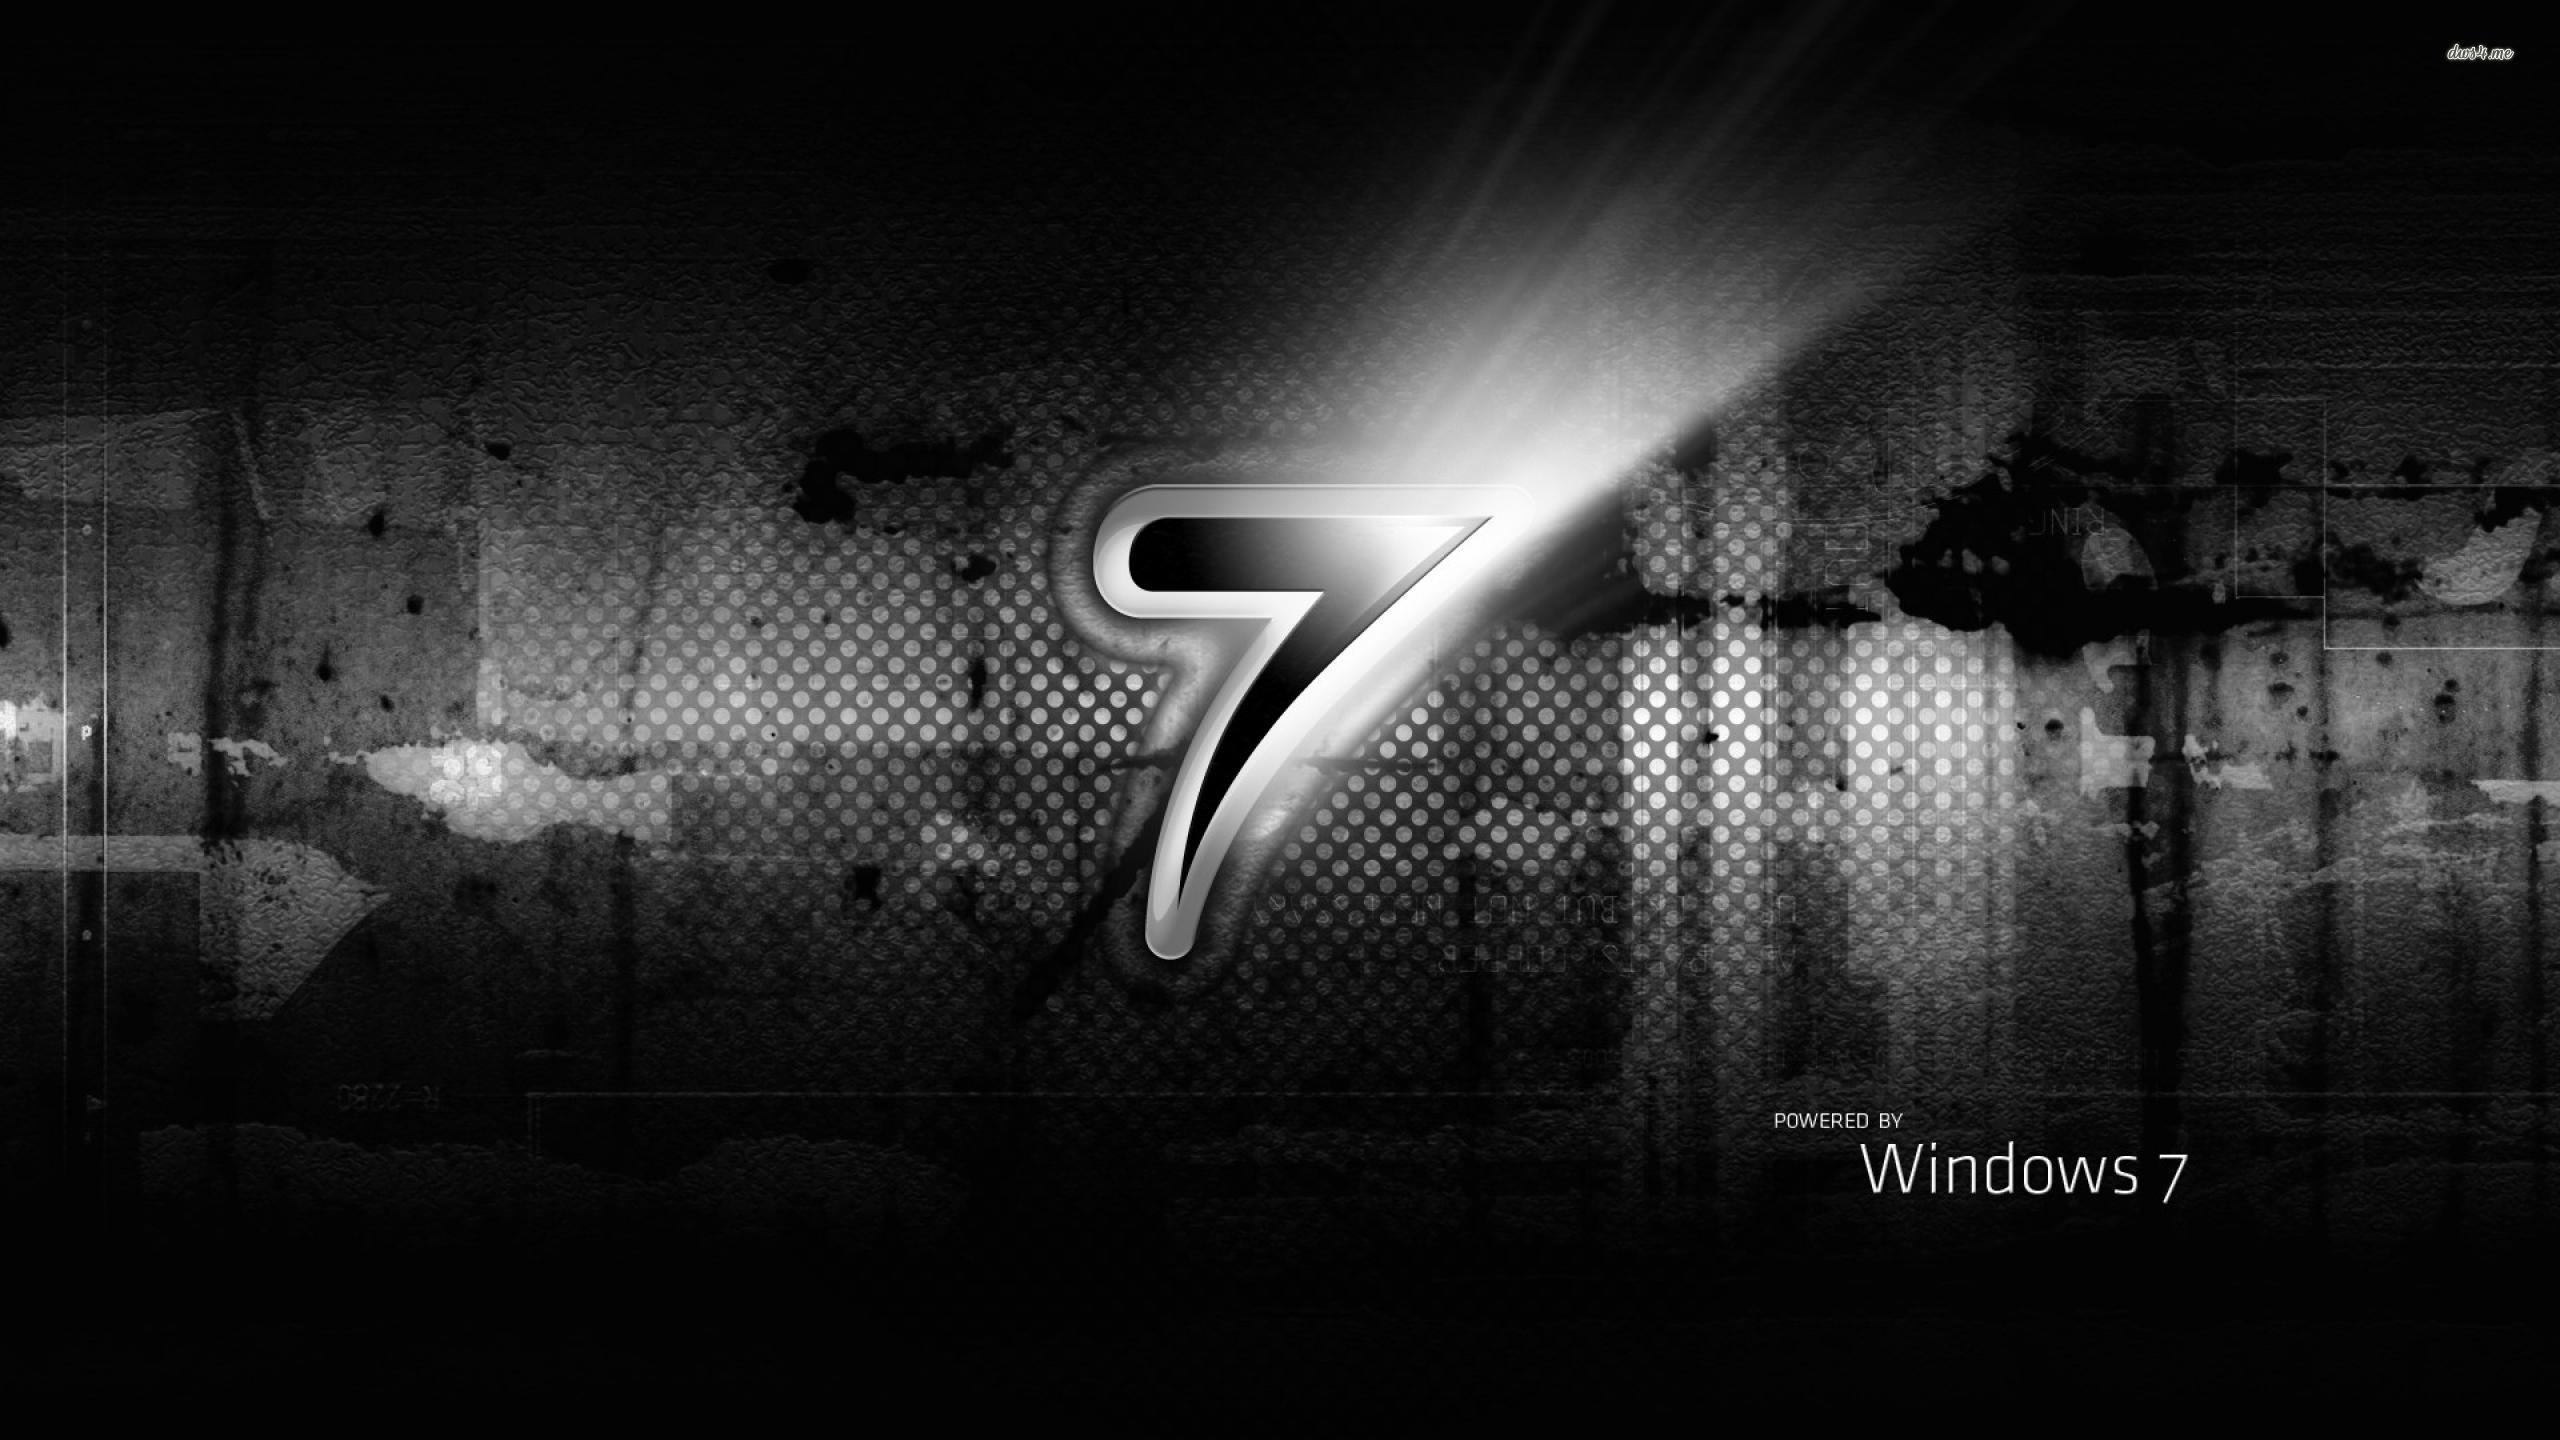 Windows 7 Black Wallpapers / Windows 7 Black Wallpaper 1080p Page 1